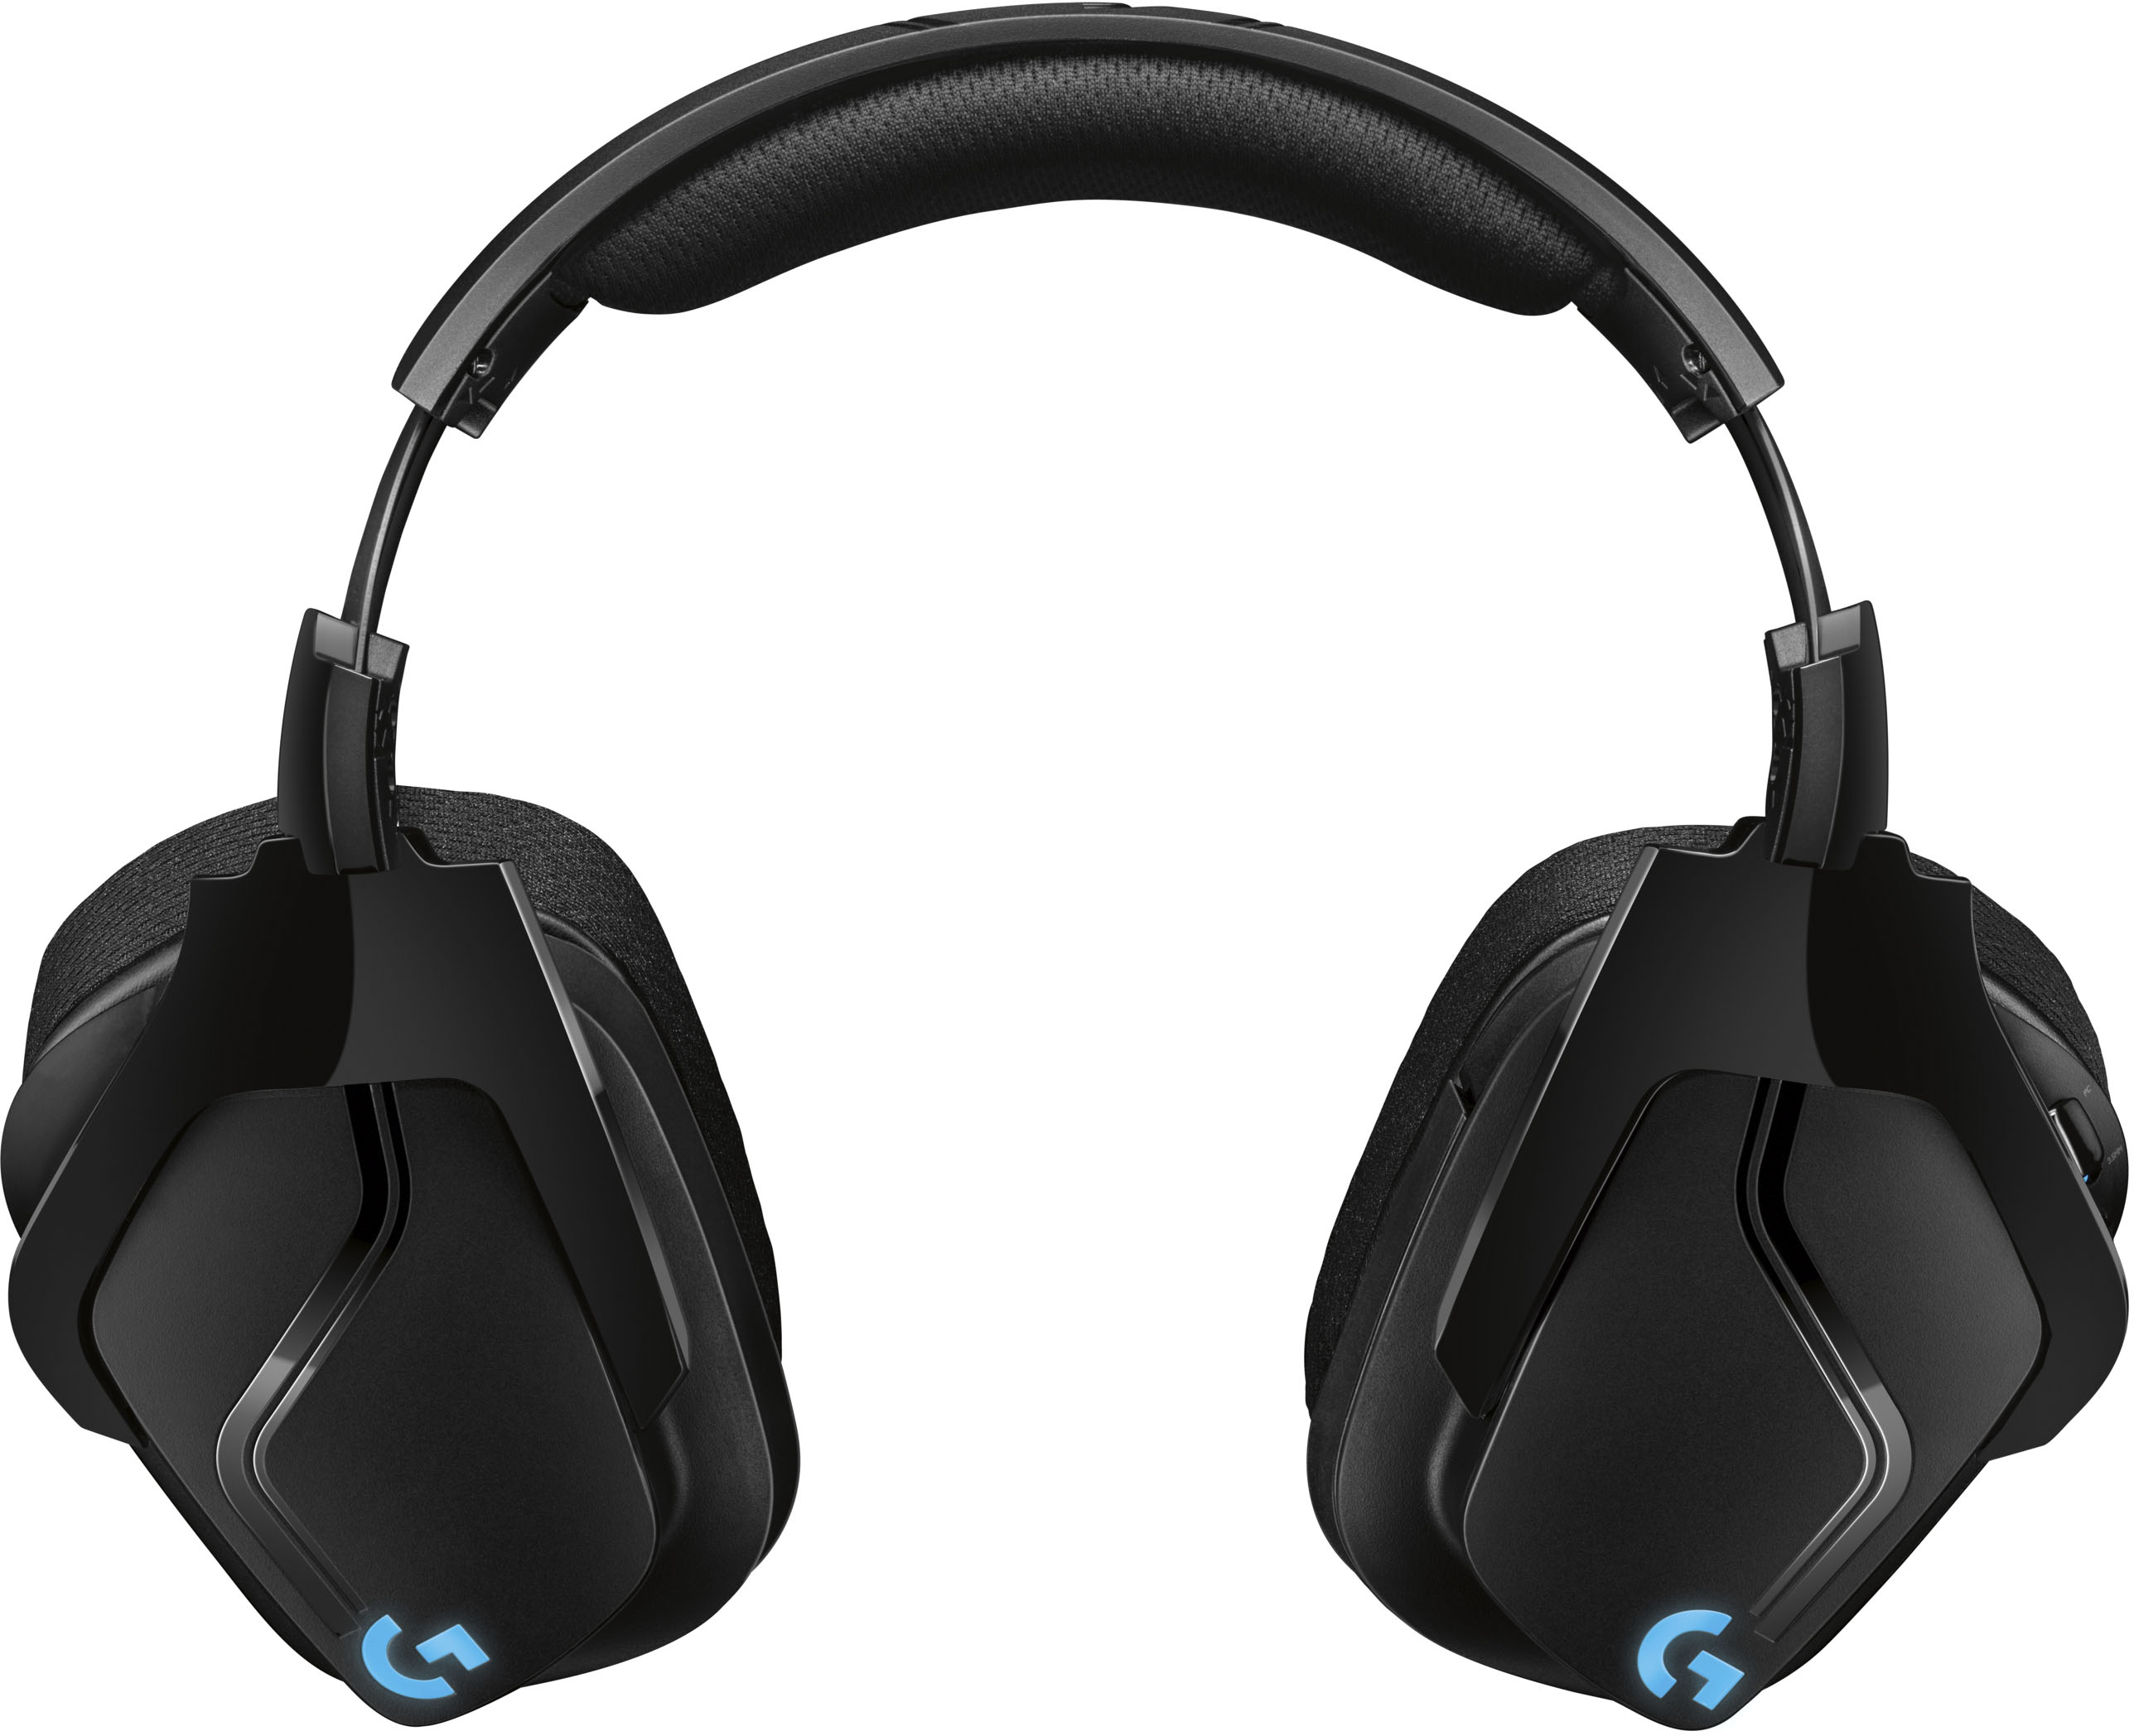 Logitech G635 7.1 Surround Sound Gaming Headset for PC with LIGHTSYNC RGB Lighting Black/Blue 981-000748 - Best Buy